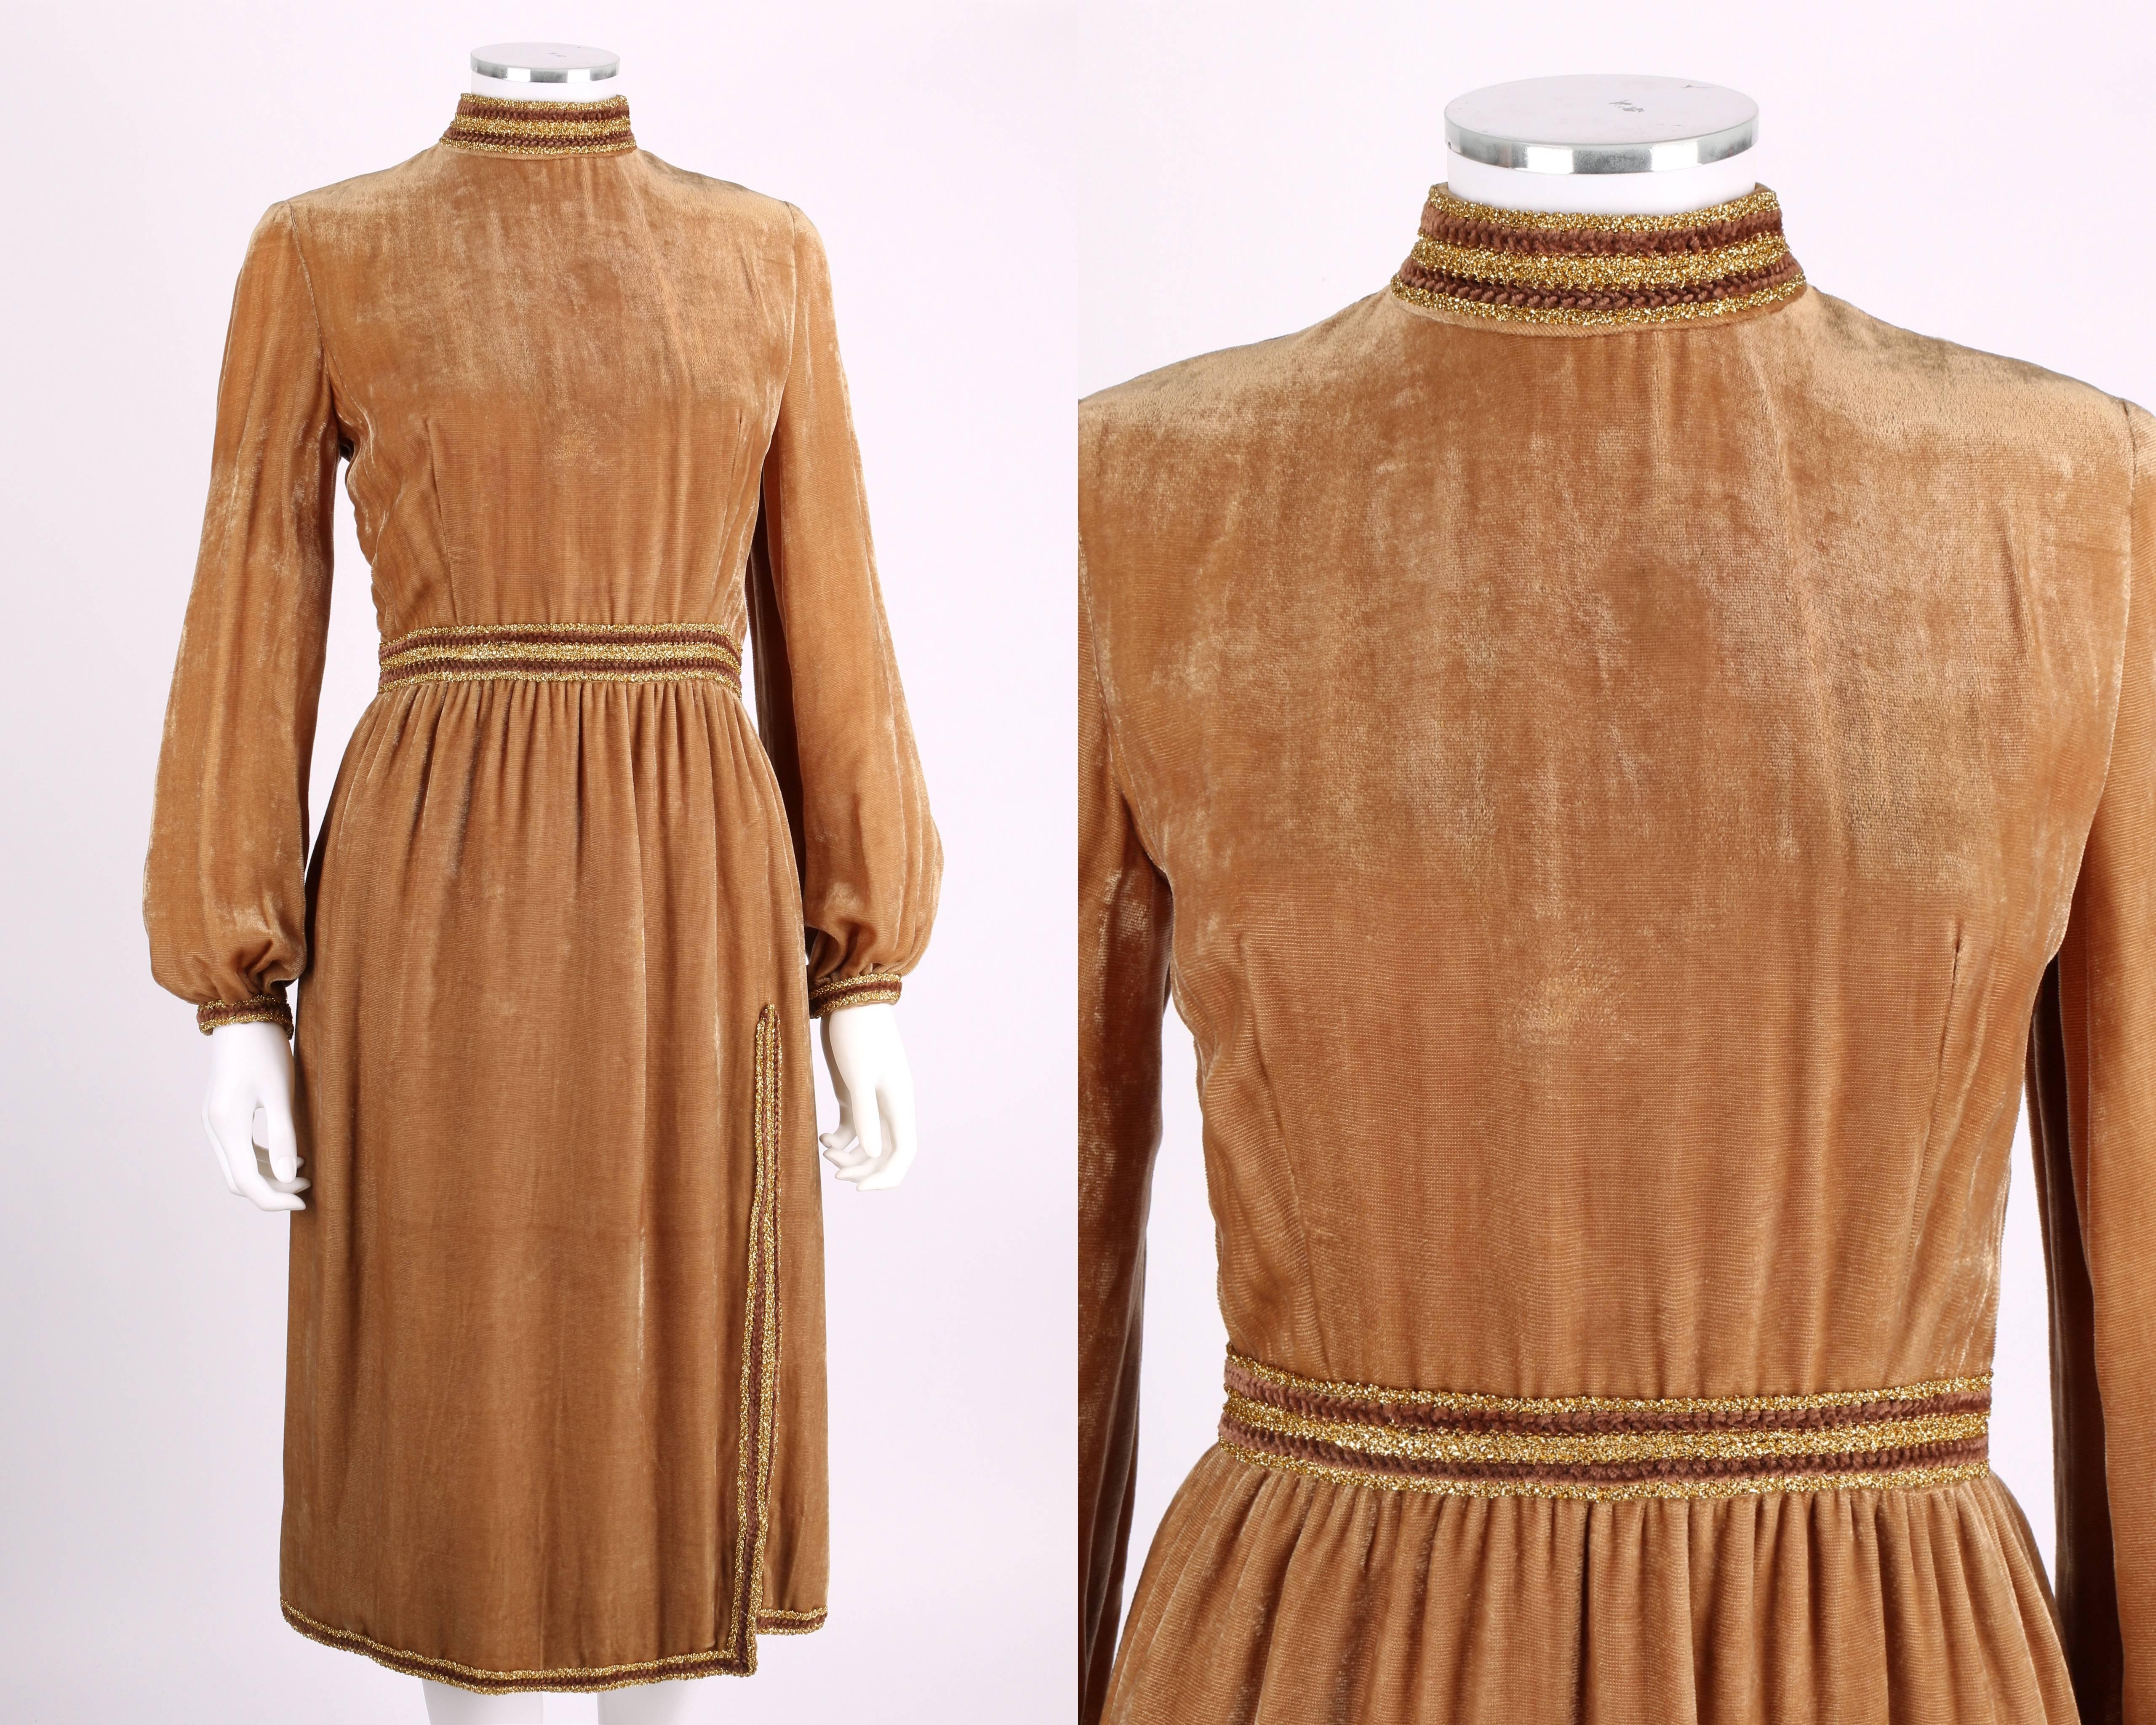 Vintage late 1960s Oscar de la Renta tan/gold/bronze velvet dress. Gold metallic and brown trim. High mock neck collar. Long bishop sleeves snap at fitted cuffs. Skirt has off-center slit at the front and back. Two pockets. Zips center back. Thinly